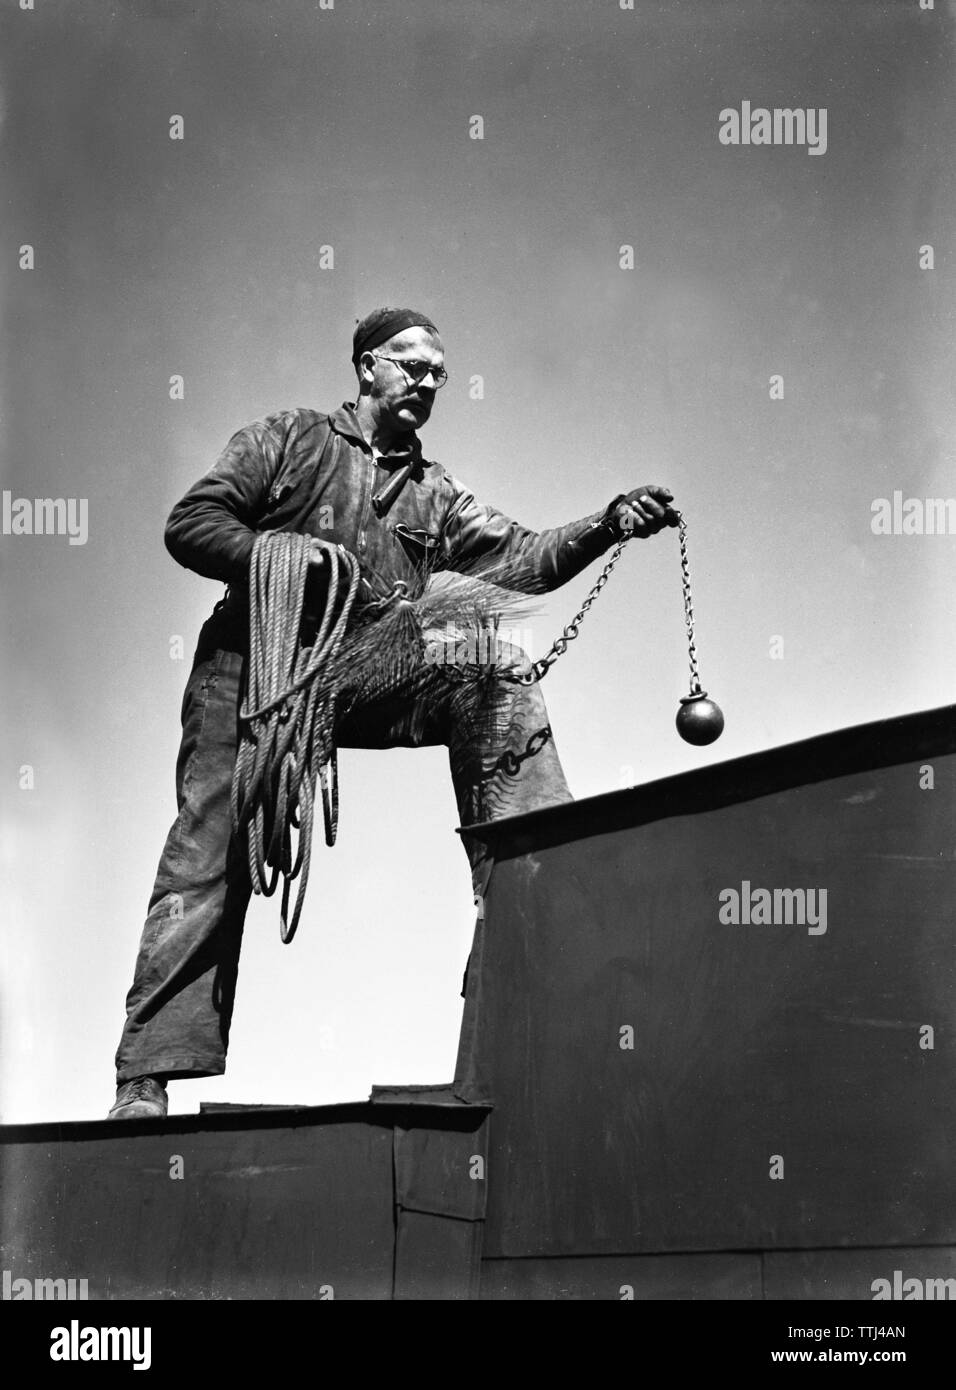 Chimney sweep. A man works as chimney sweeper and climbing the roof all  dressed for work and carrying his equipment. Sweden 1940. Kristoffersson  ref 120-2 Stock Photo - Alamy